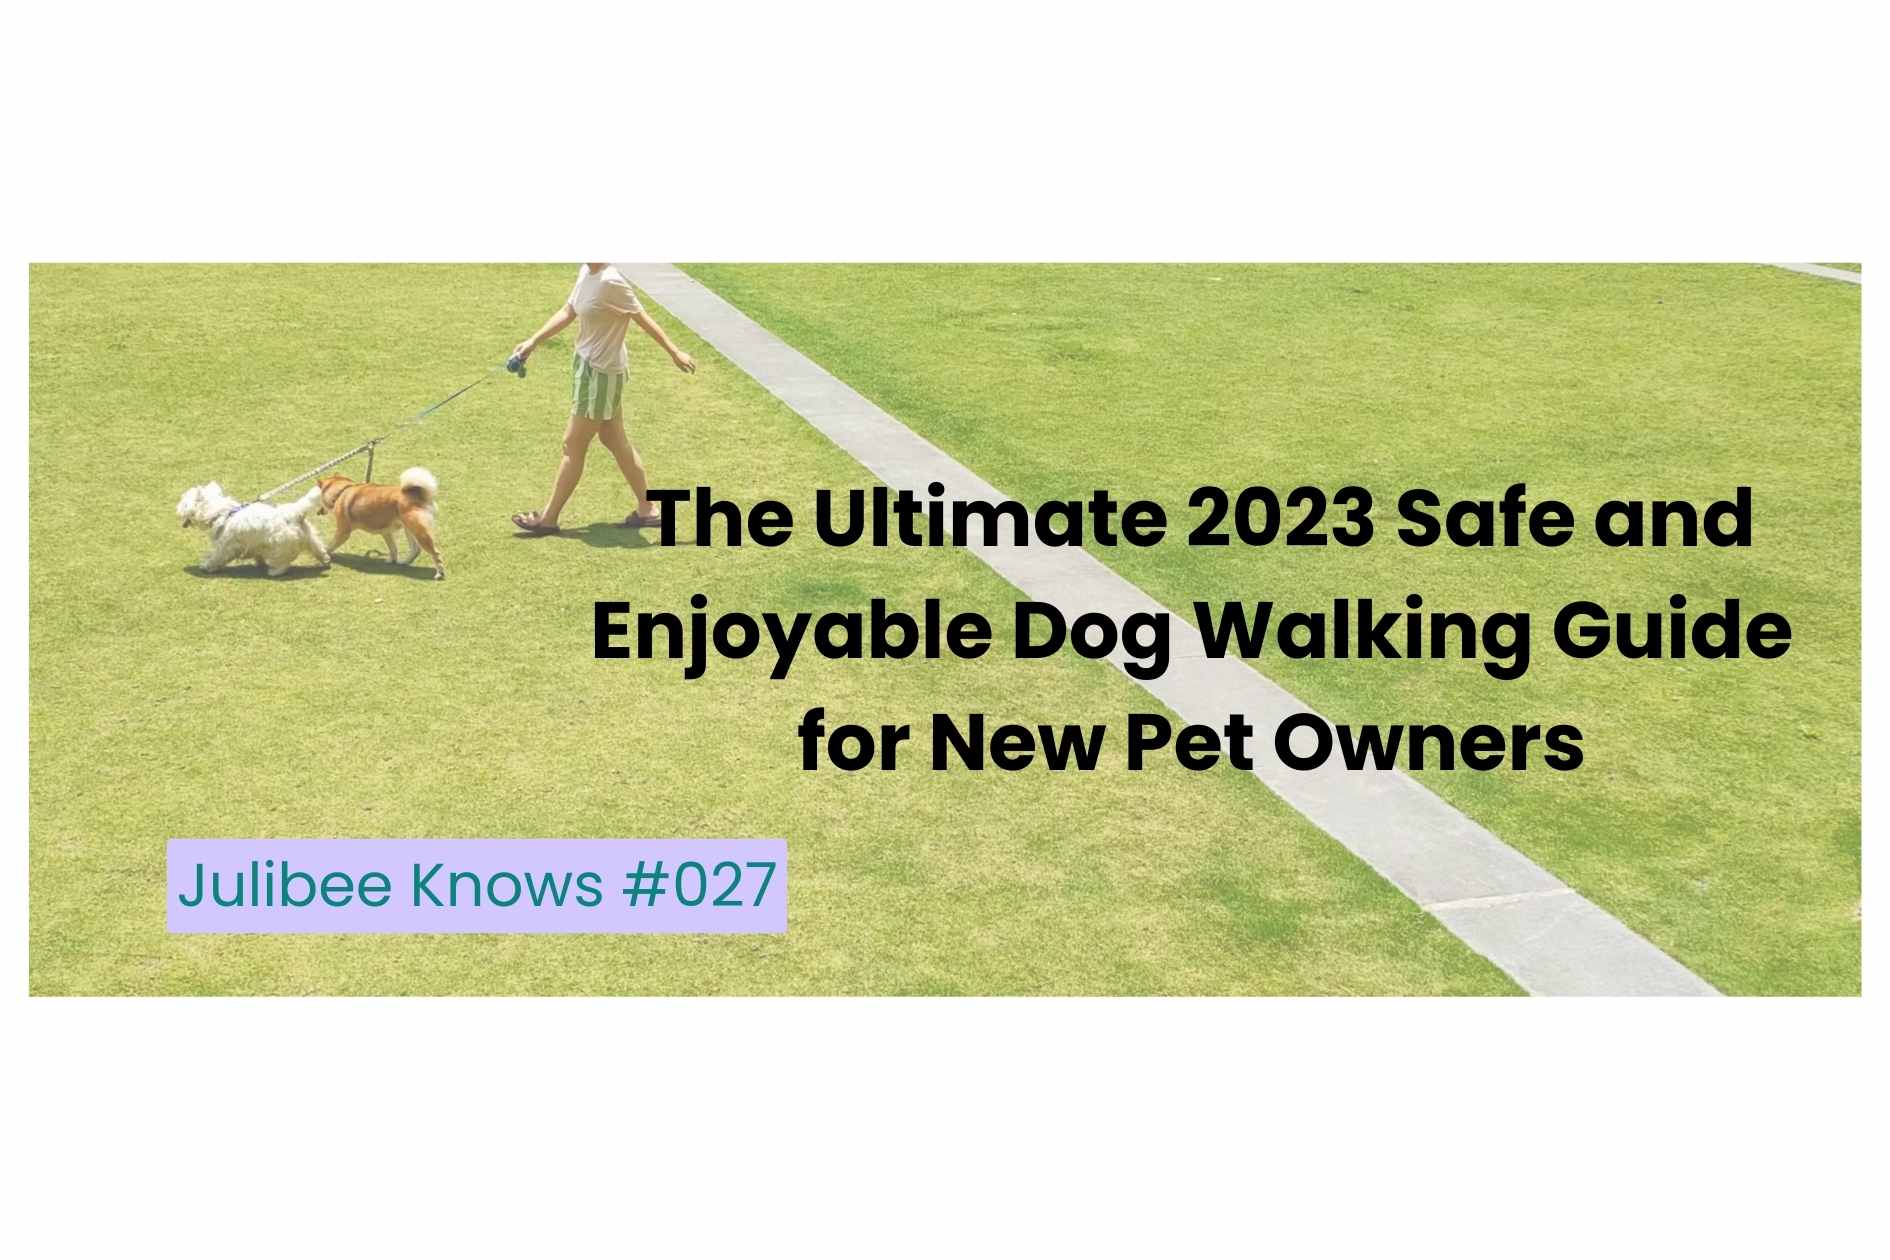 Walking Dogs: More Than Just Physical Exercise? The Ultimate 2023 Safe and Enjoyable Dog Walking Guide for New Pet Owners - Julibee's